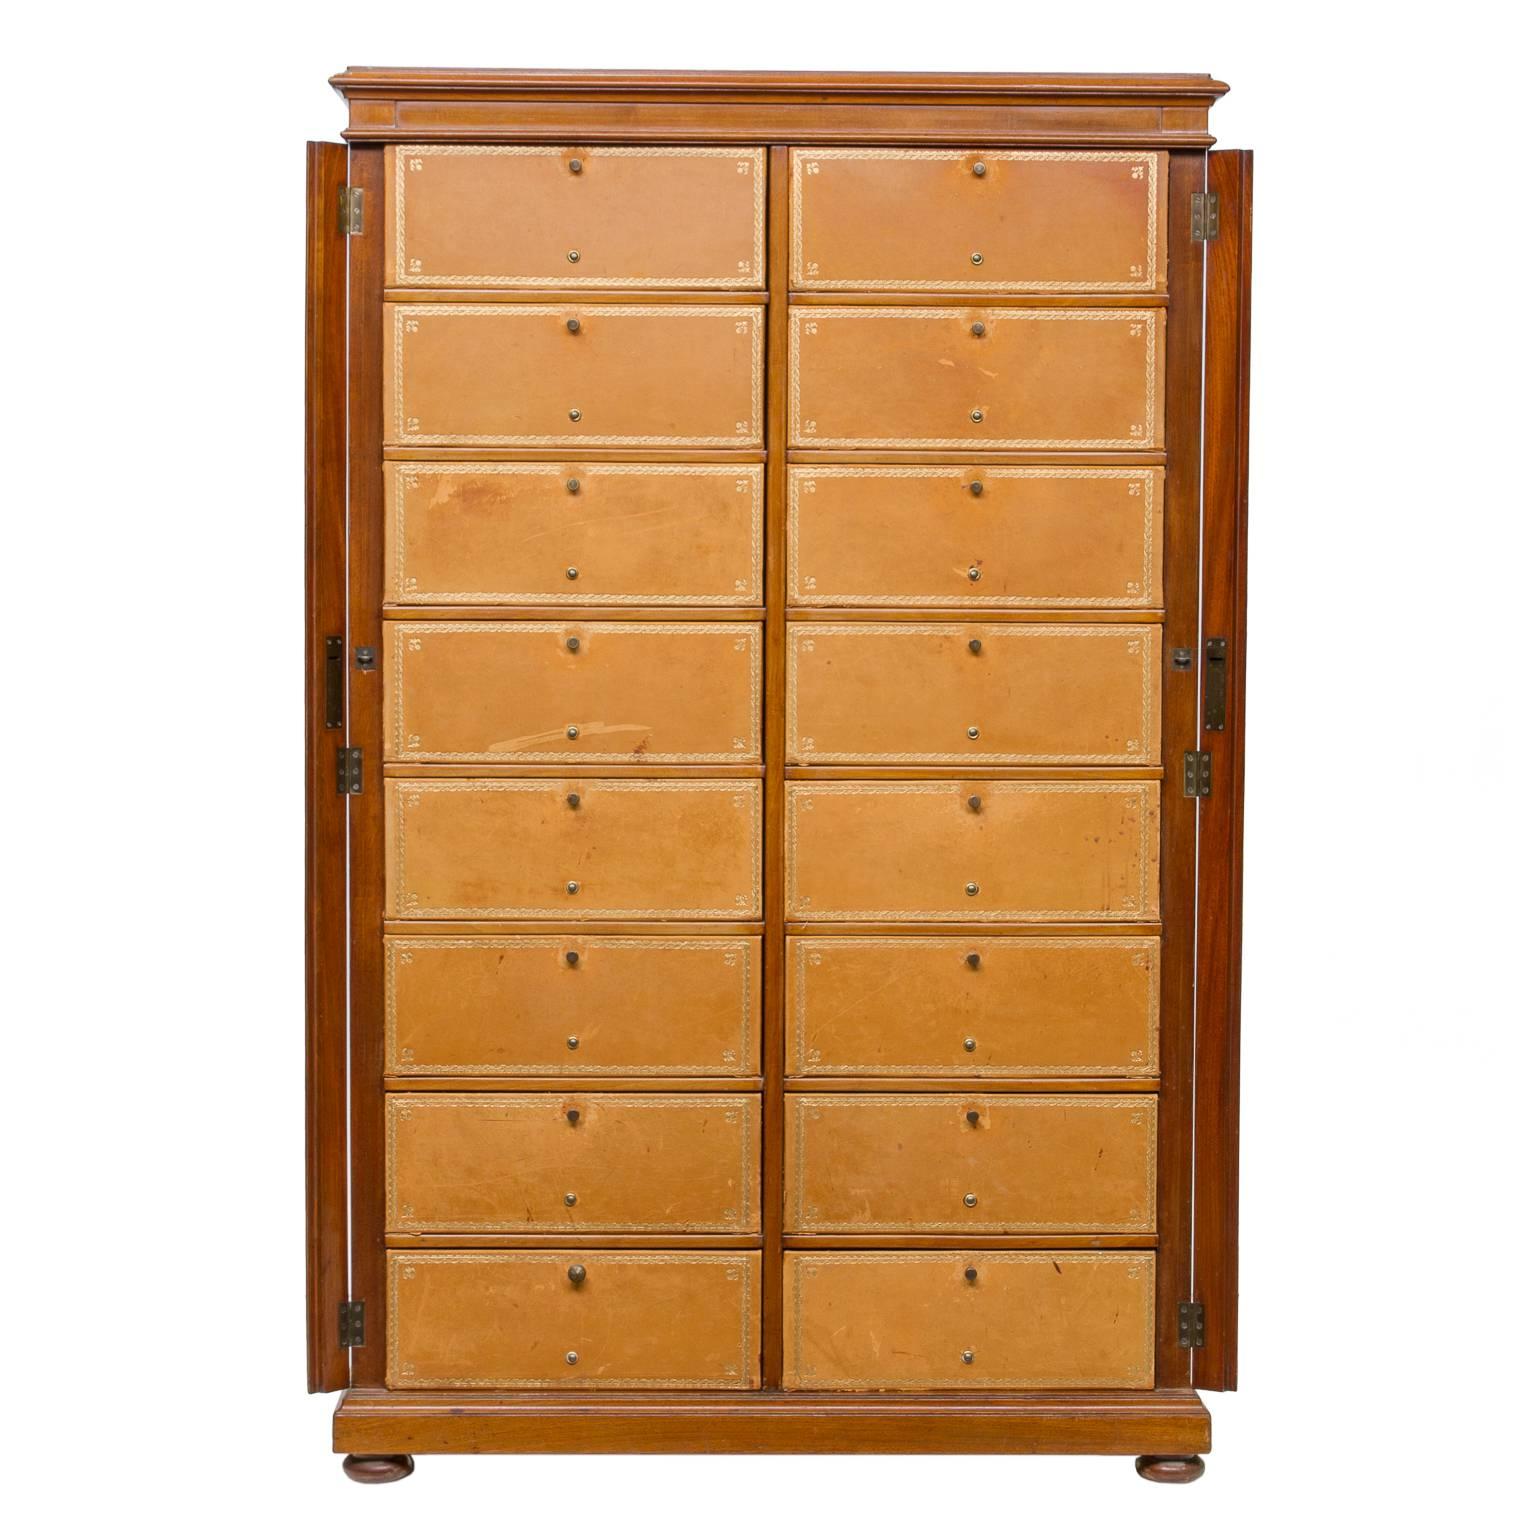 English mahogany file cabinet with two vertical rows of embossed leather fronted boxes. Each front drops to reveal nice size storage. Great for shoes or other items. The body is made of fine mahogany wood, very solid. This piece has had fading occur